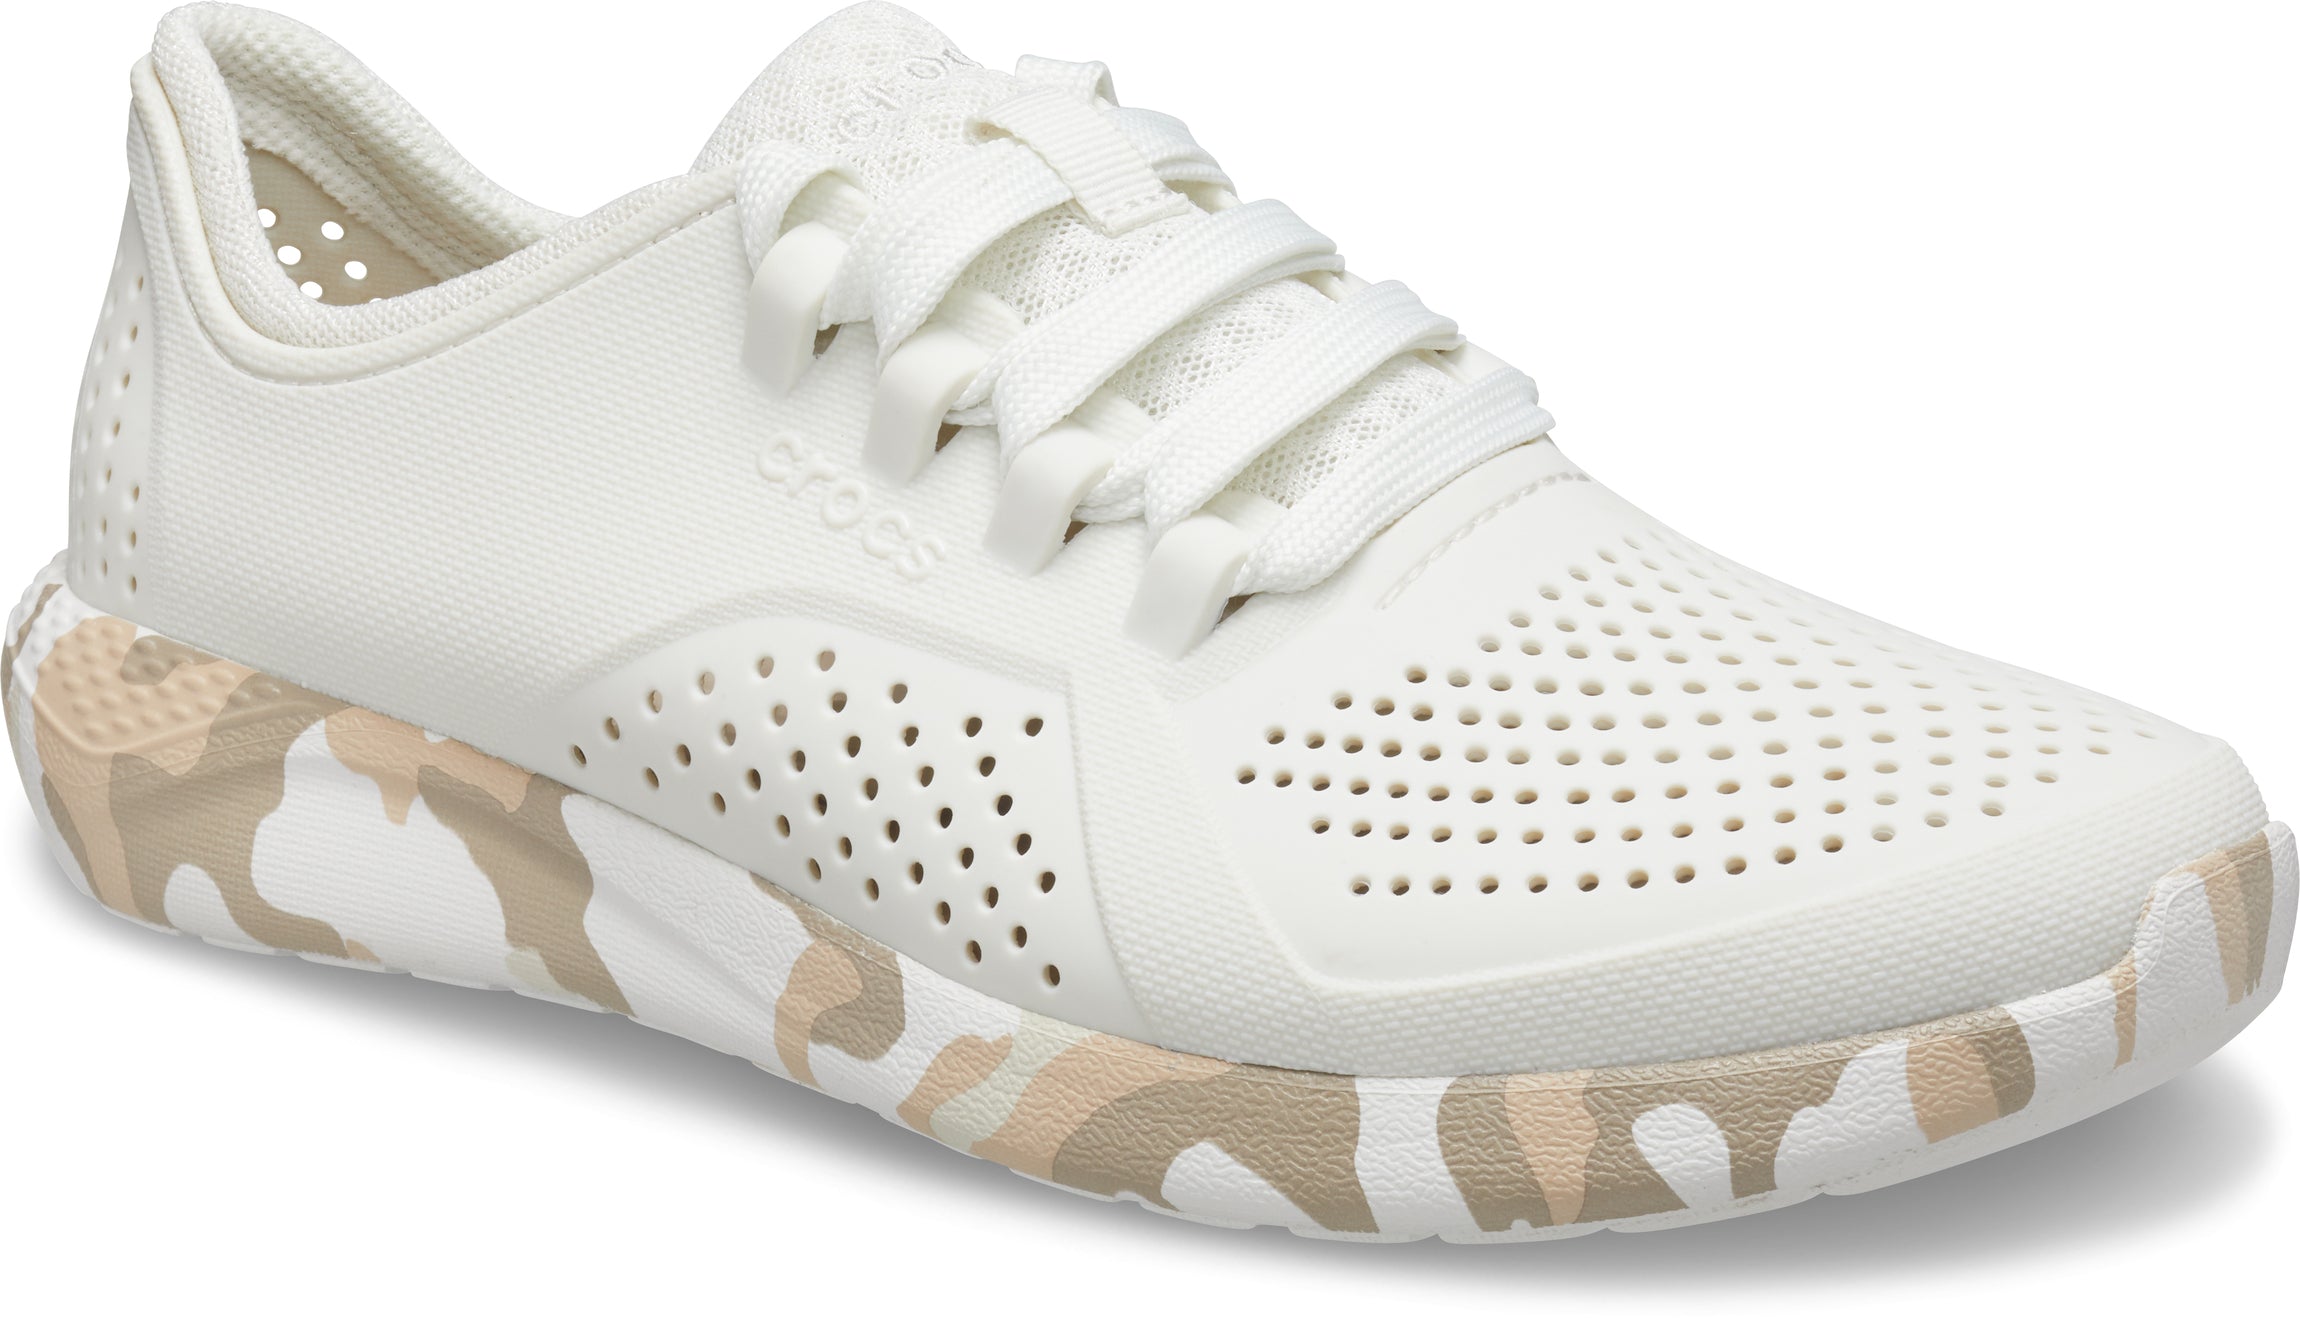 Women's LiteRide™ Printed Camo Pacer Almost white